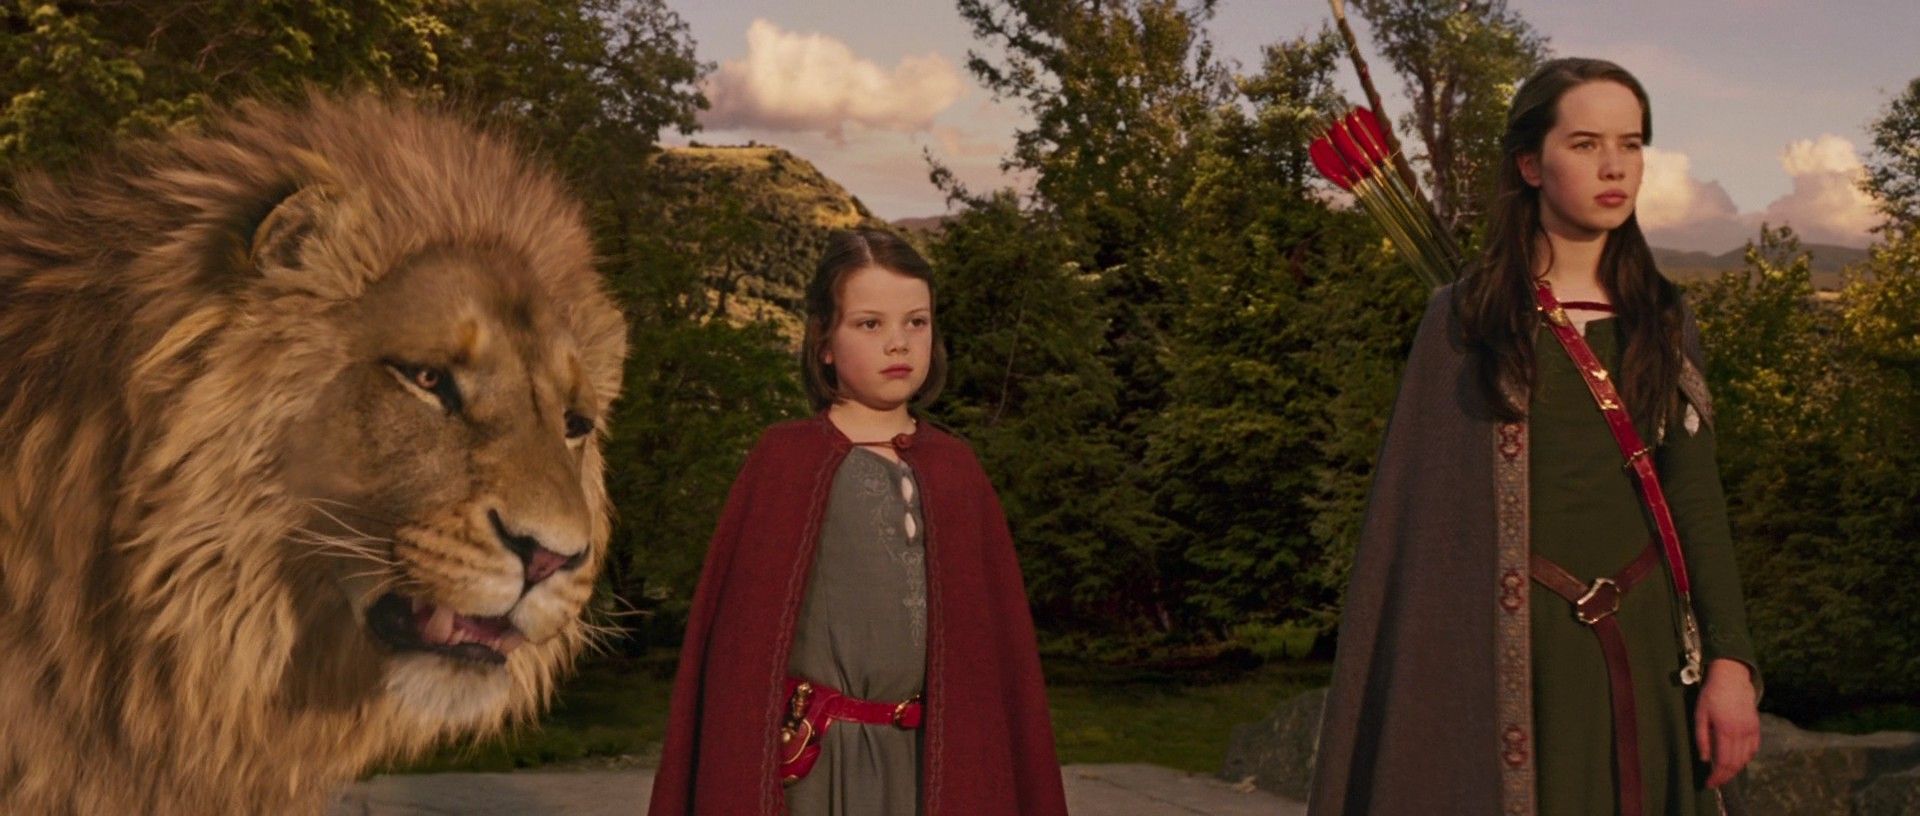 Wallpaper Blink Best Of The Chronicles Of Narnia Prince The Witch And The Wardrobe Aslan Lucy And Susan Wallpaper & Background Download